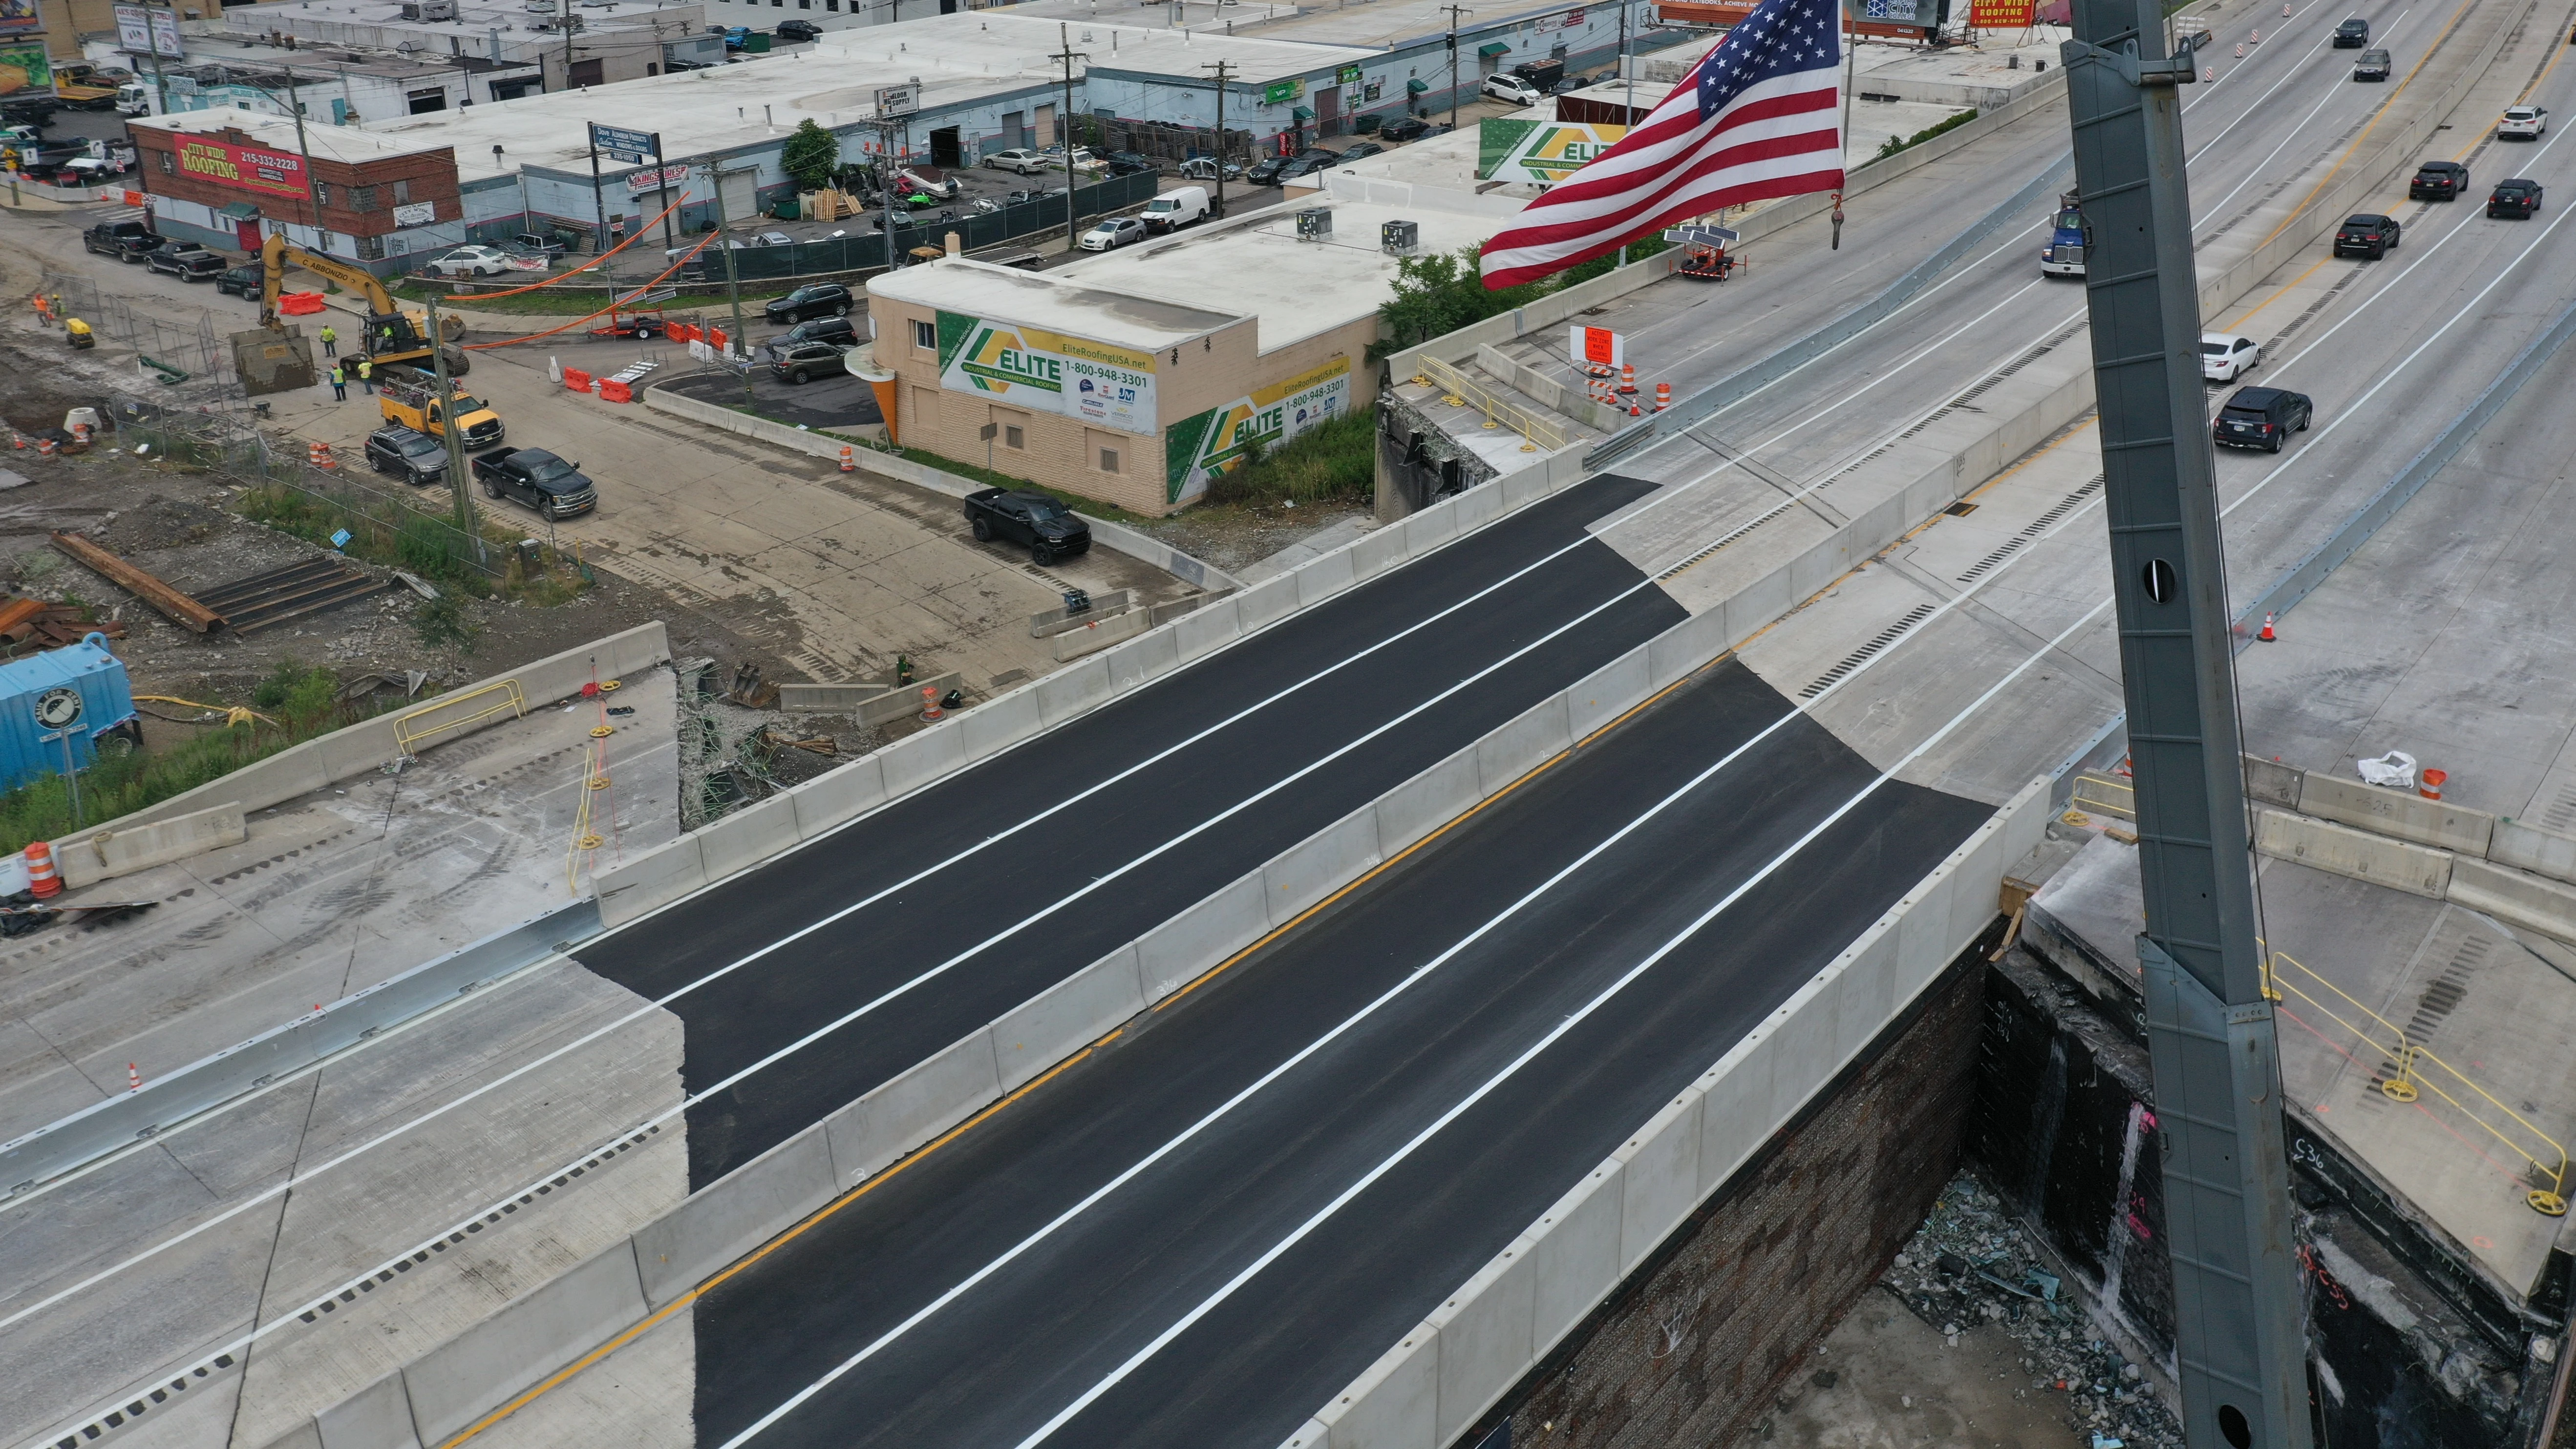 An aerial image of the temporary I-95 overpass structure on opening day with a United State flag affixed to a crane flying high above it.